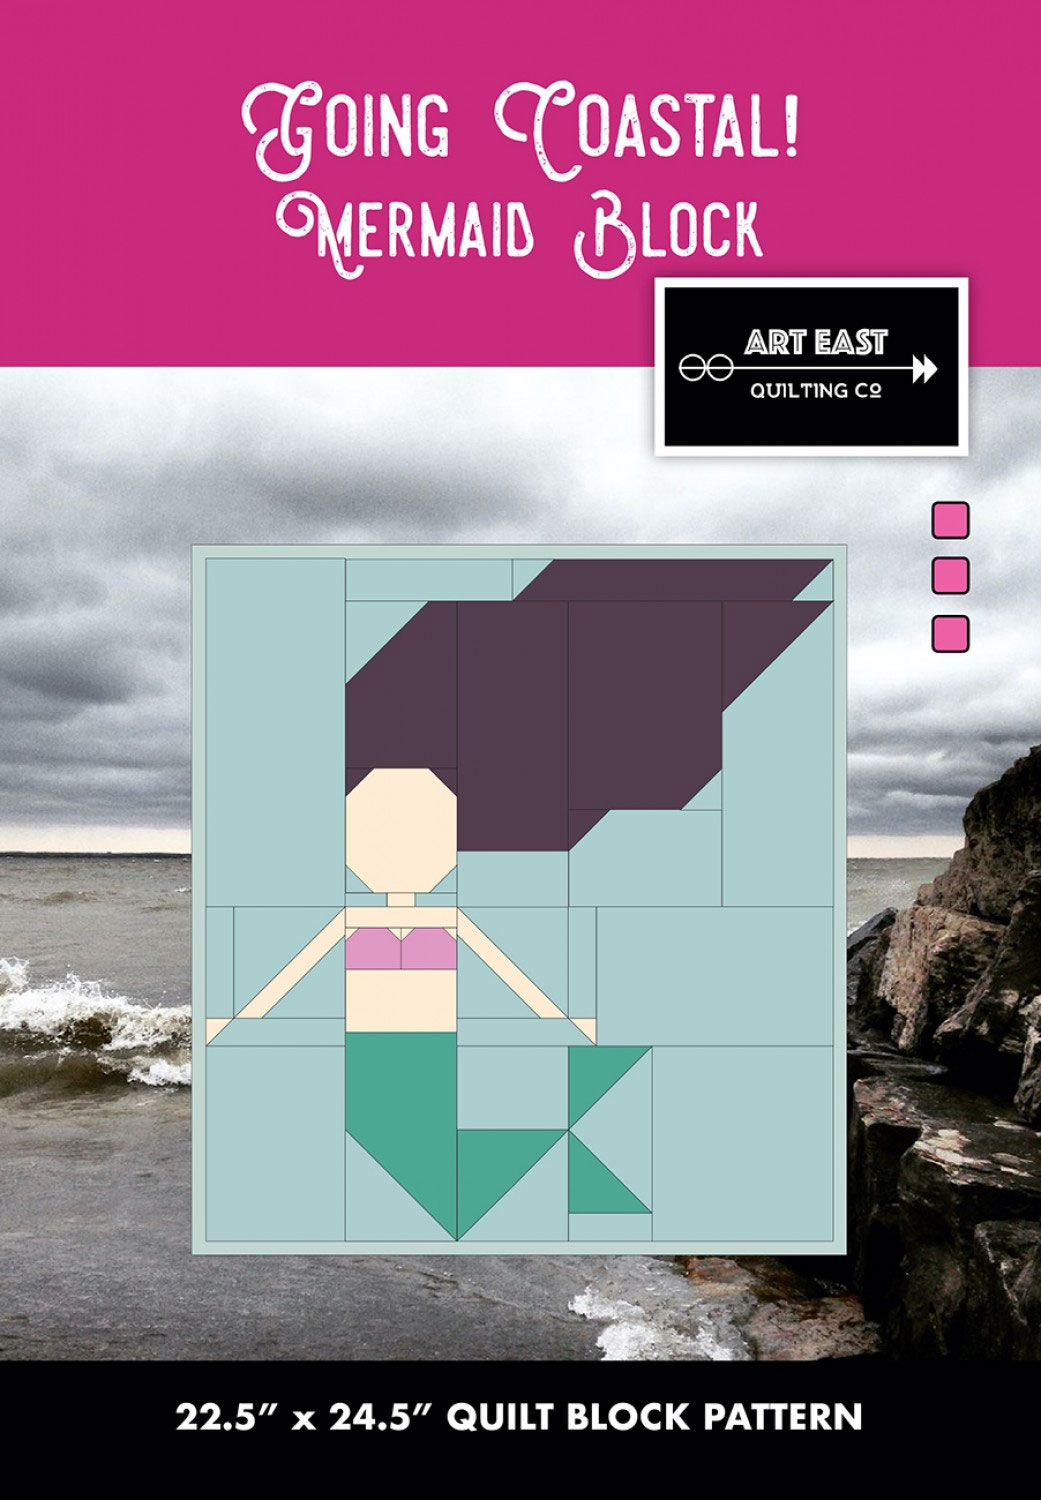 Mermaid-Block-Going-Coastal-quilt-sewing-pattern-Art-East-Quilting-Co-front